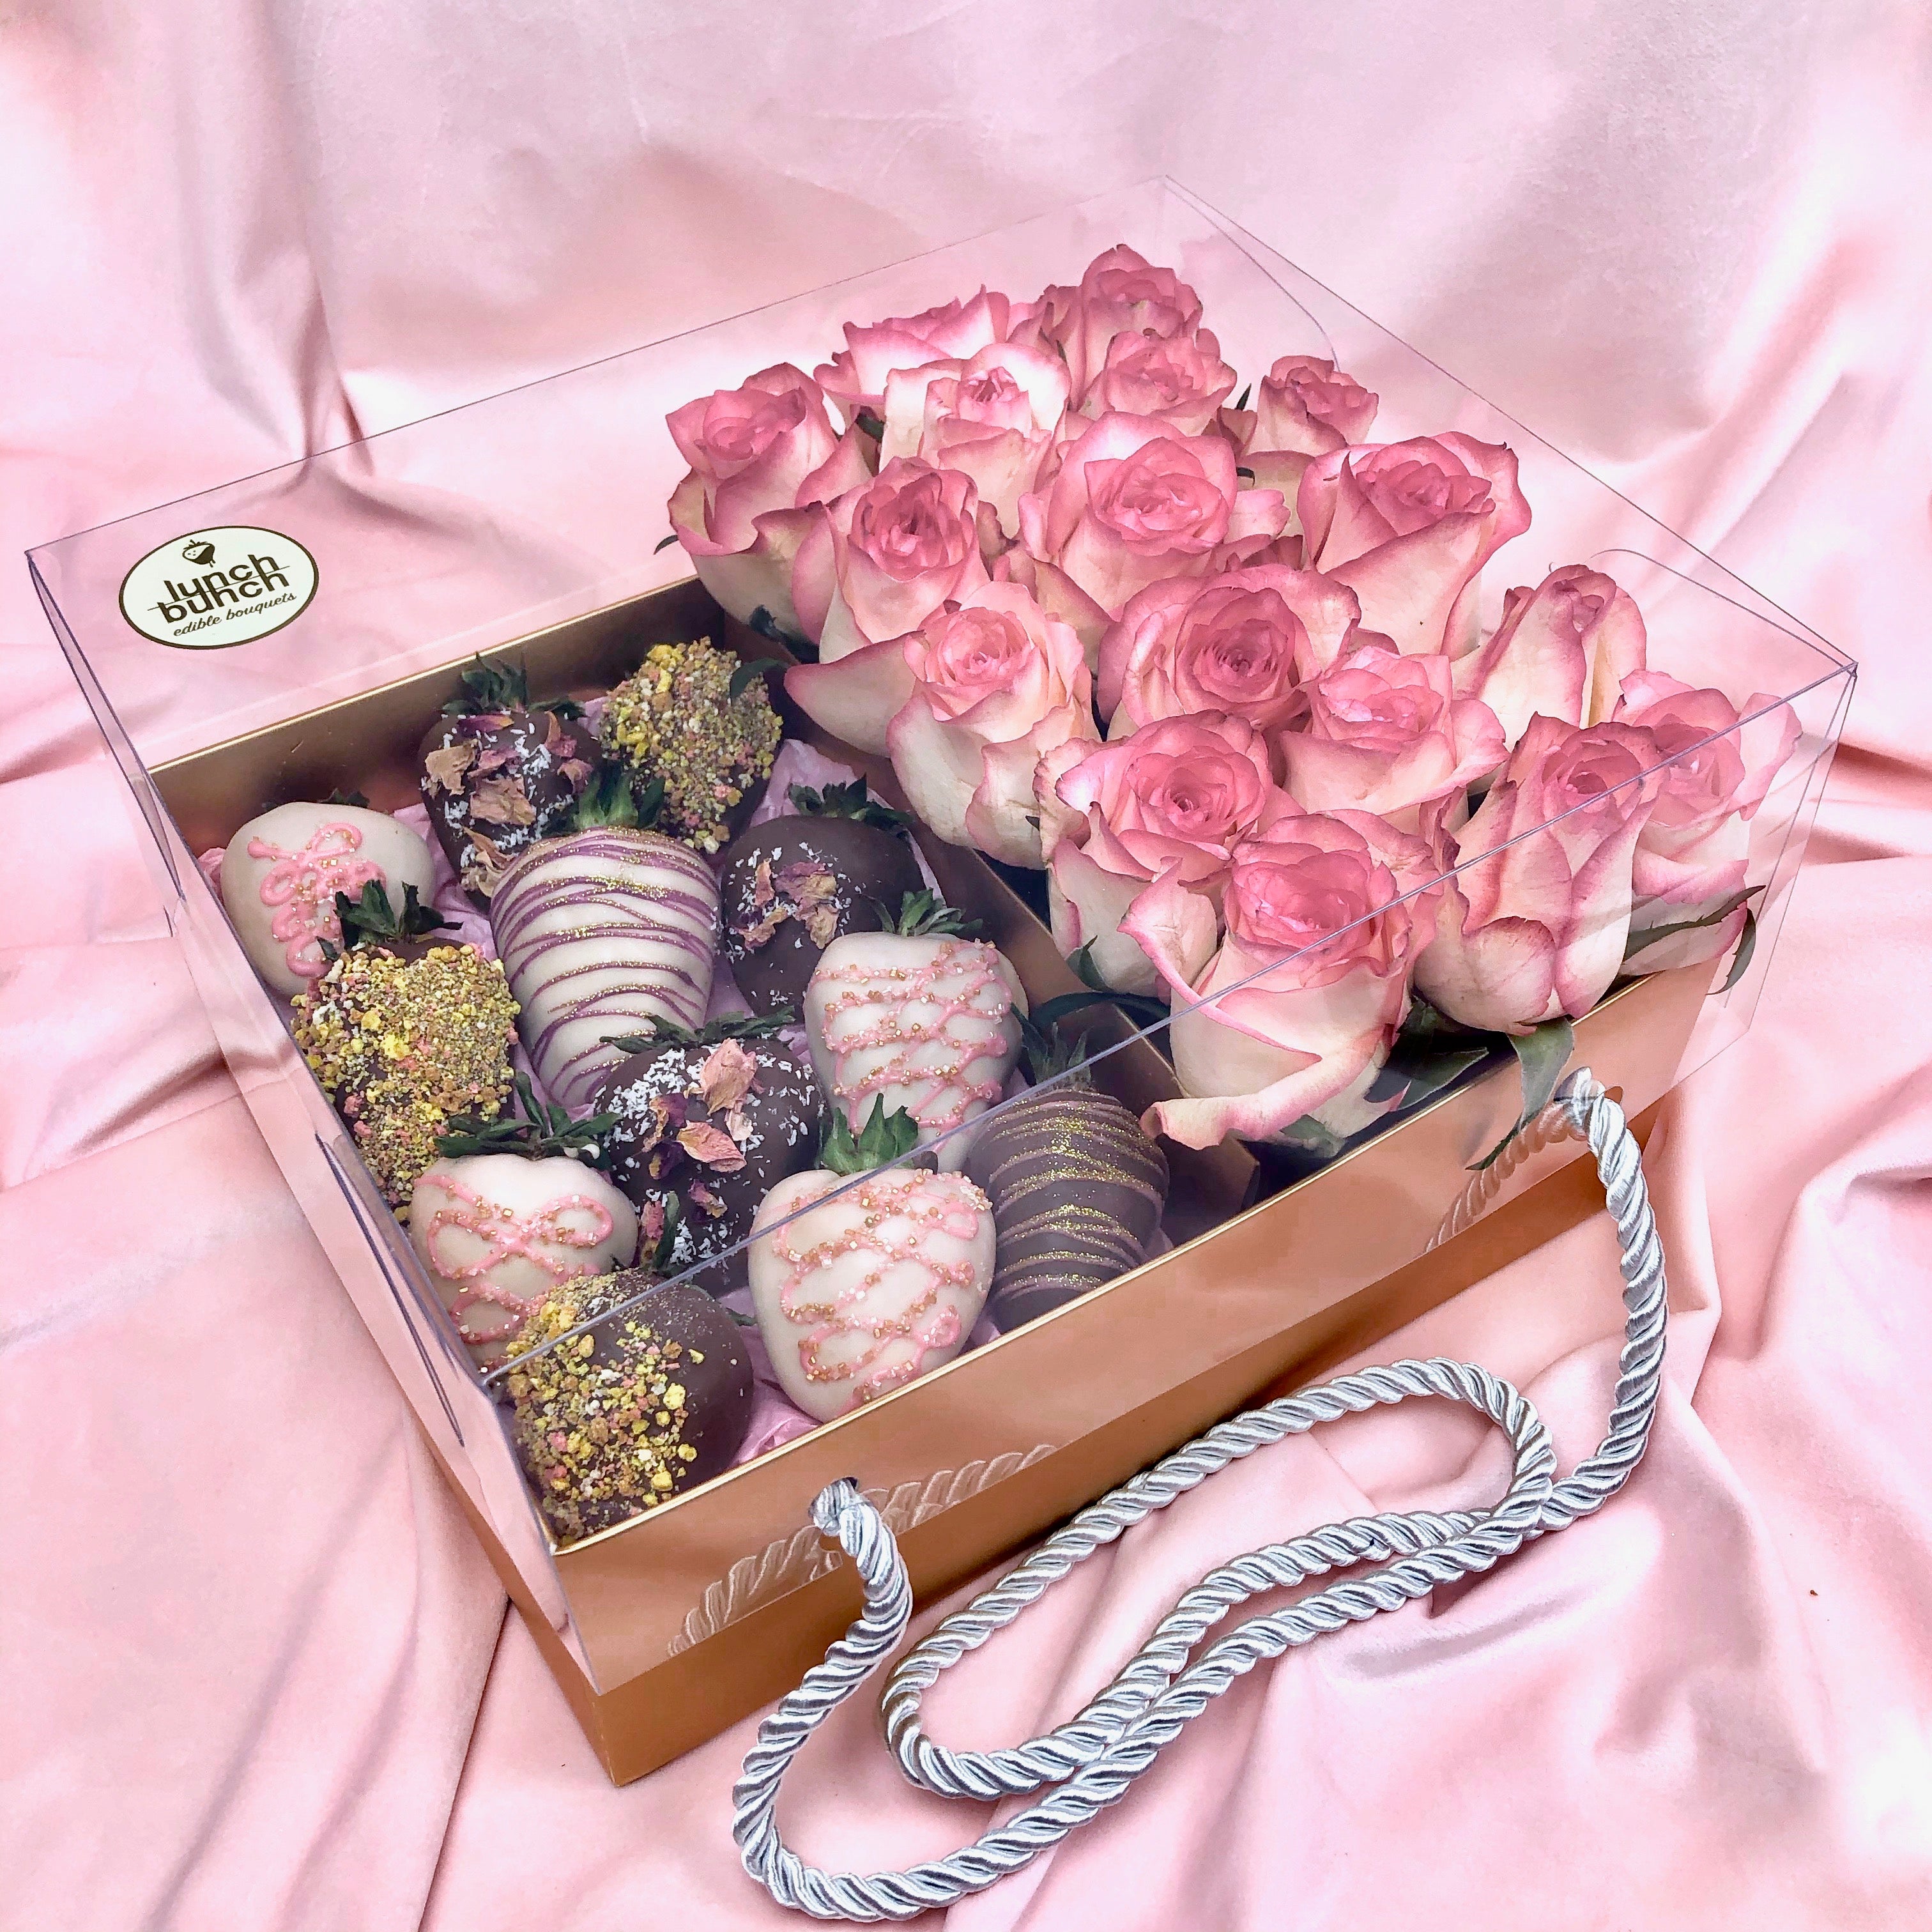 Chocolate covered strawberries box ugly delivery roses and chocolate Sandy delivery I believe next day delivery online flowers and chocolate hamper